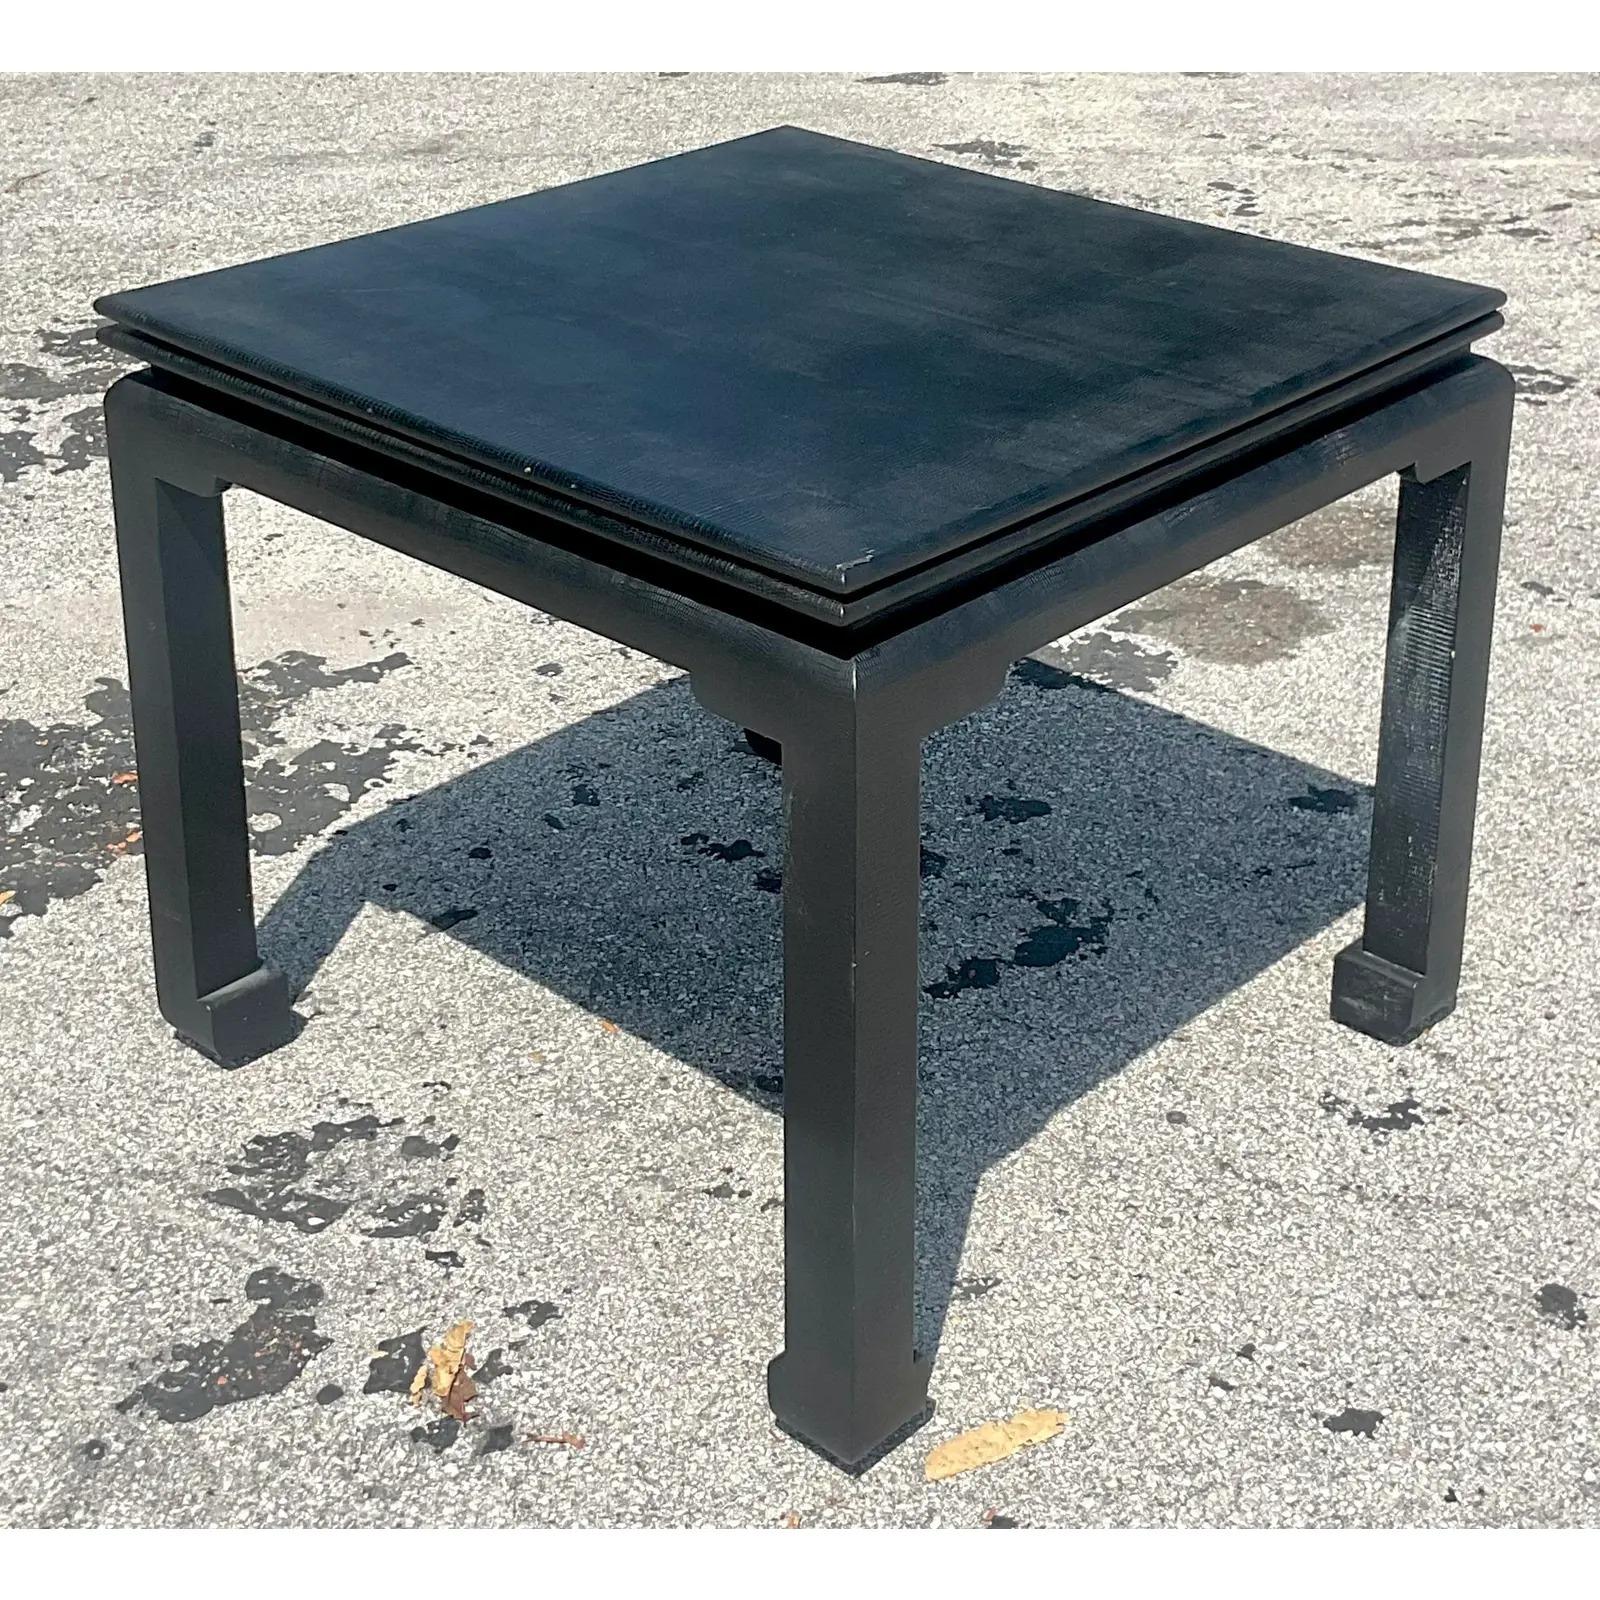 A fabulous vintage Regency Ming legs Game table. A chic embossed python in a deep black color. Opens up to a full size dining table. Slide easily on a track. Acquired from a Palm Beach estate.

Open table width 70.75